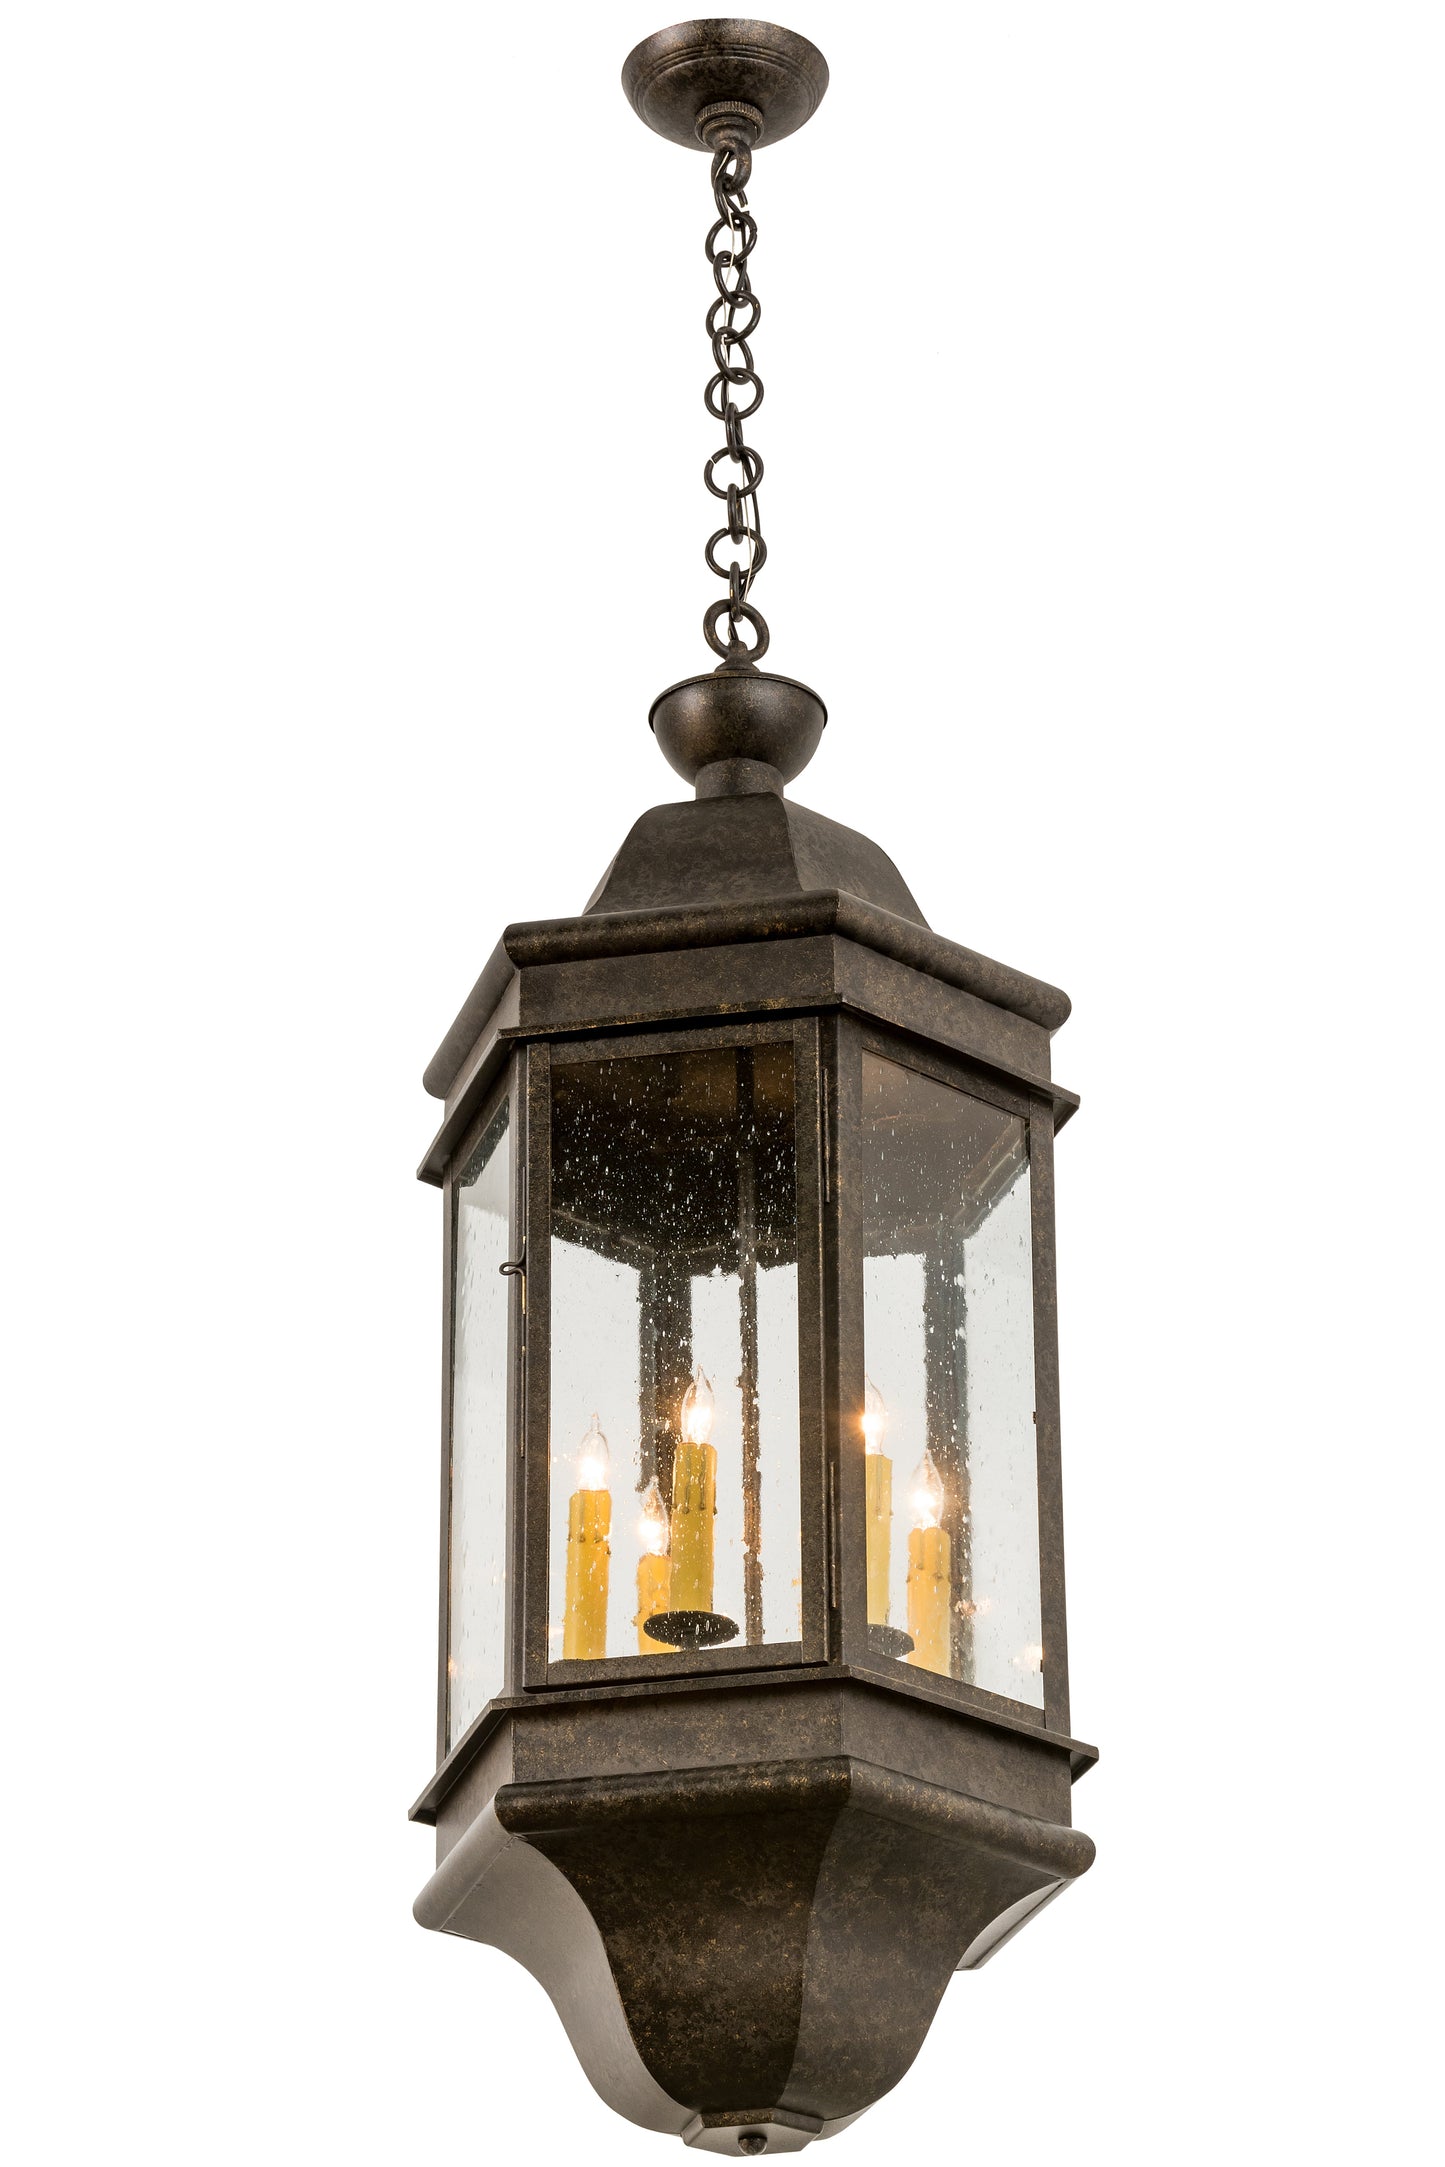 15" Gascony Pendant by 2nd Ave Lighting